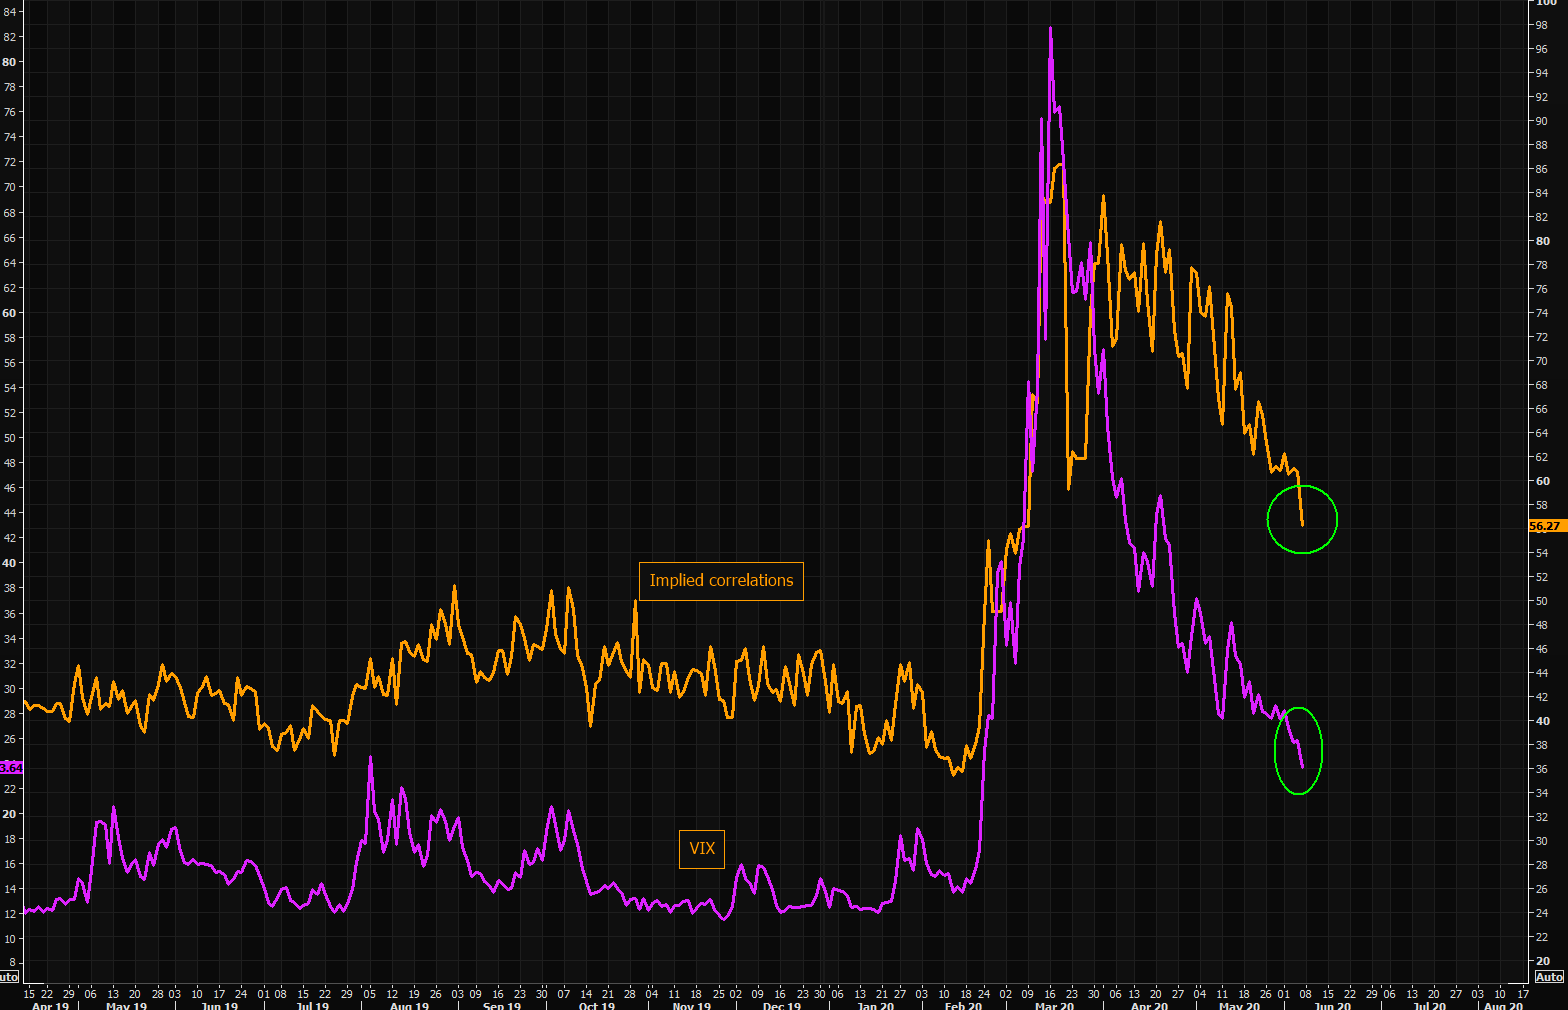 Implied correlations moving lower as VIX takes new leg lower